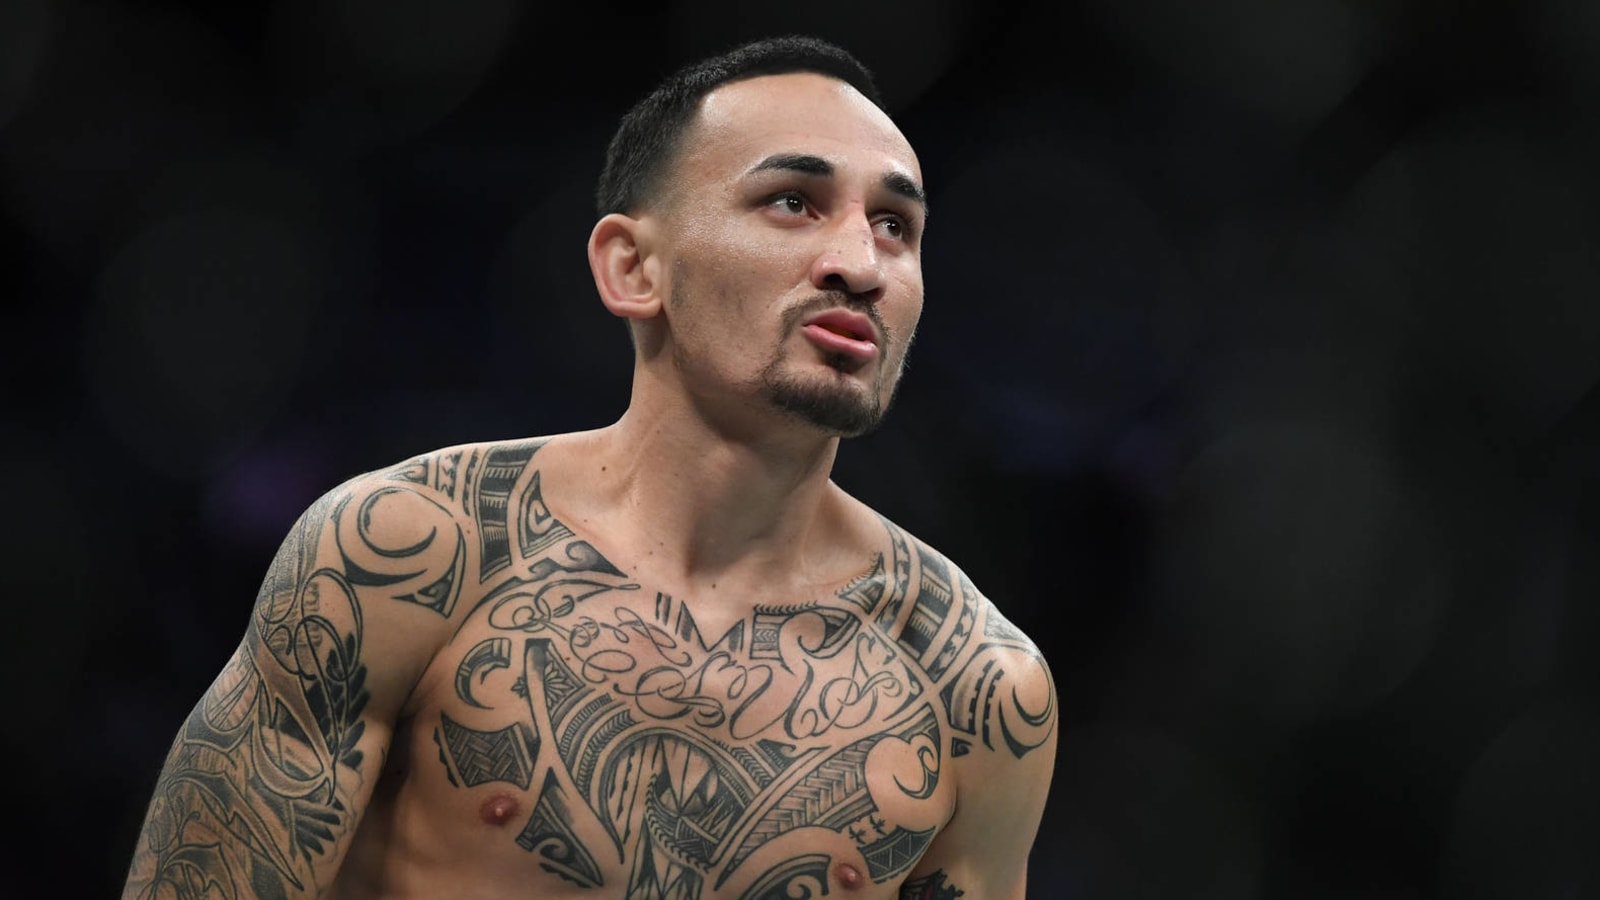 Max Holloway to face Calvin Kattar in main event of Jan. 16 UFC show